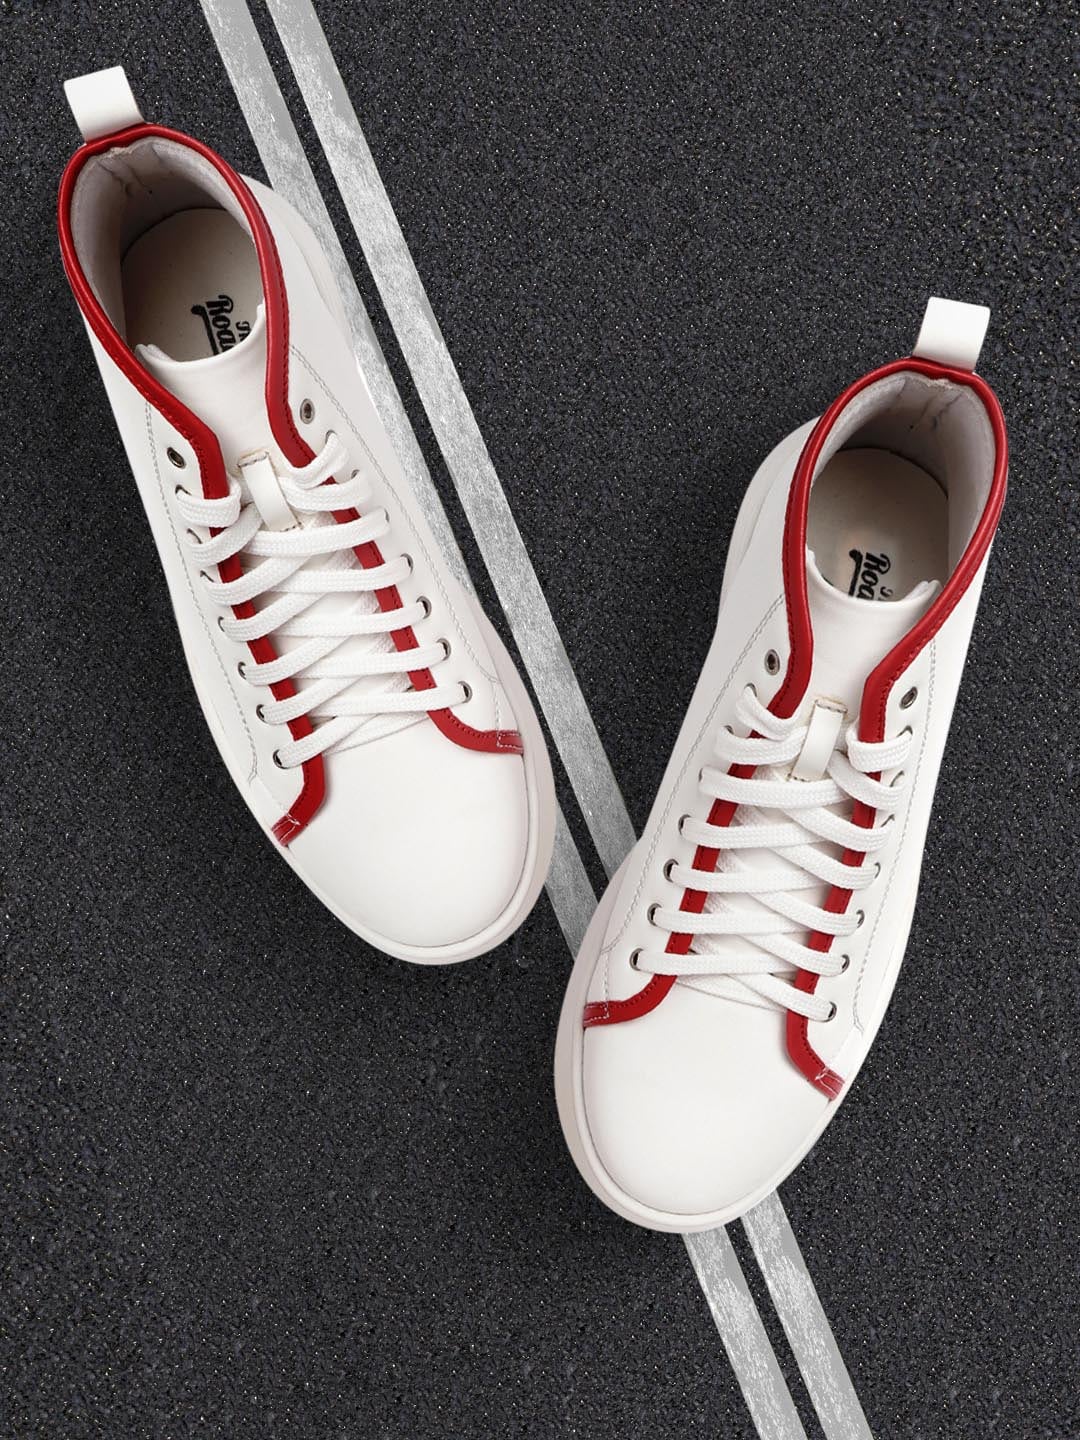 Roadster Women White & Red Flatform Sneakers Price in India